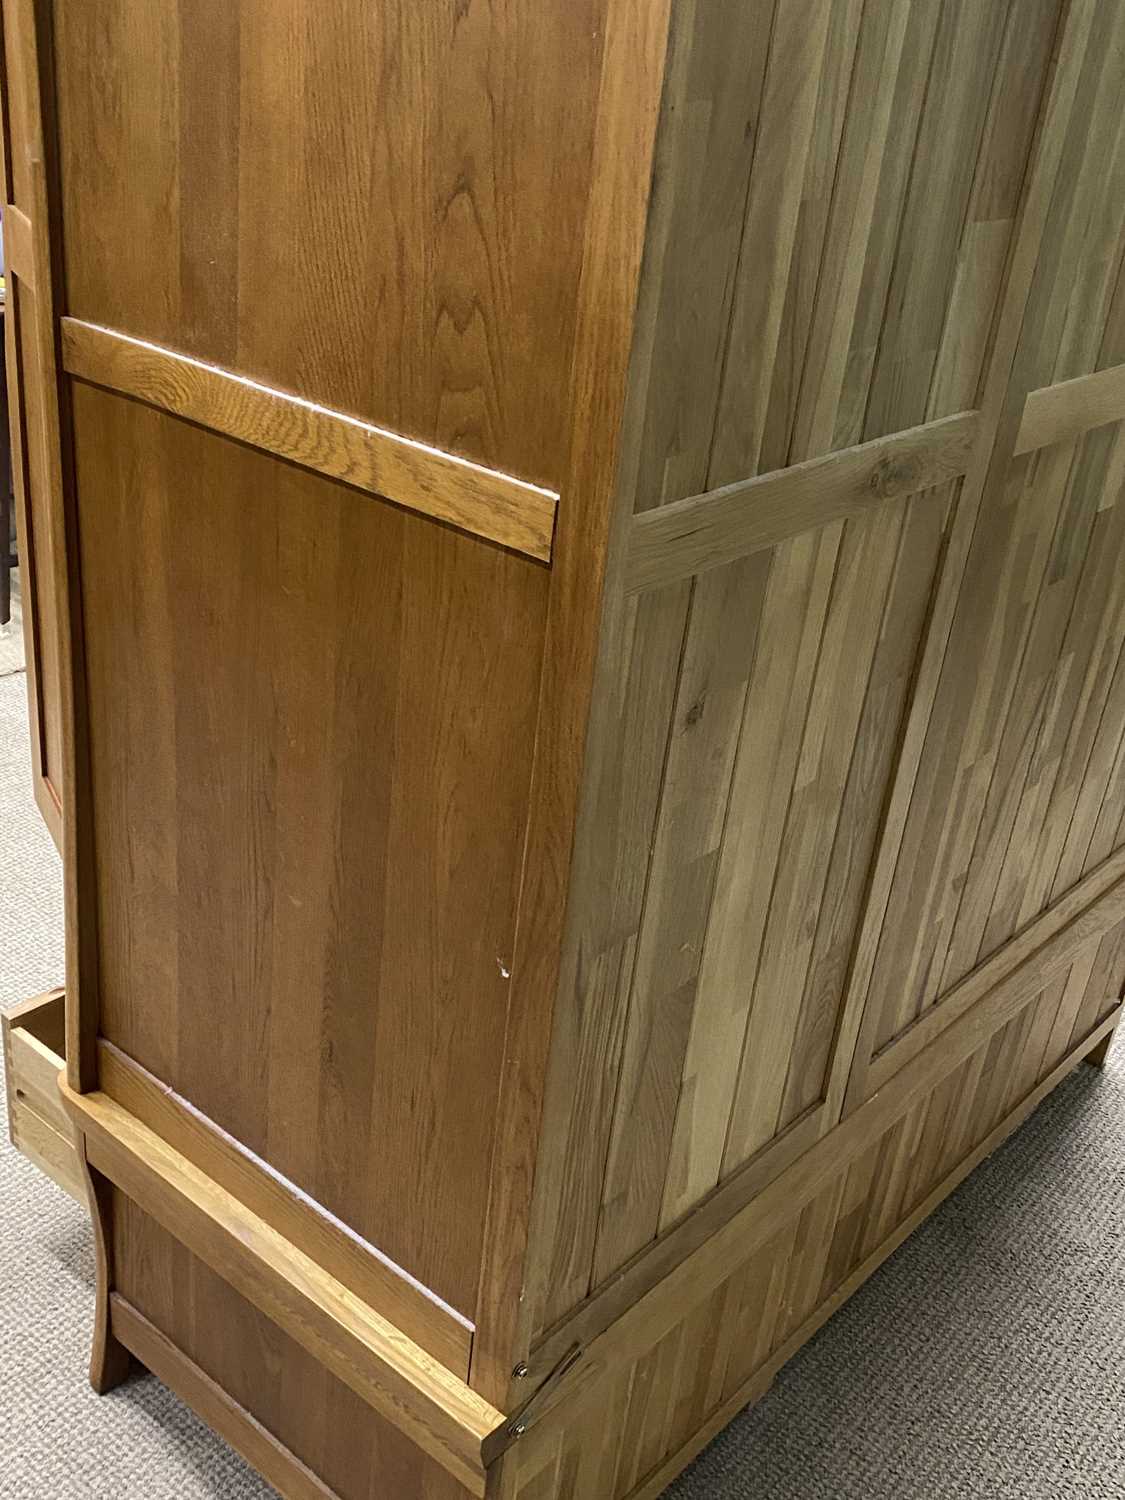 ALMOST NEW OAK TRIPLE WARDROBE having two base drawers, 185 (h) x 144 (w) x 59cms (d) Provenance: - Image 5 of 5